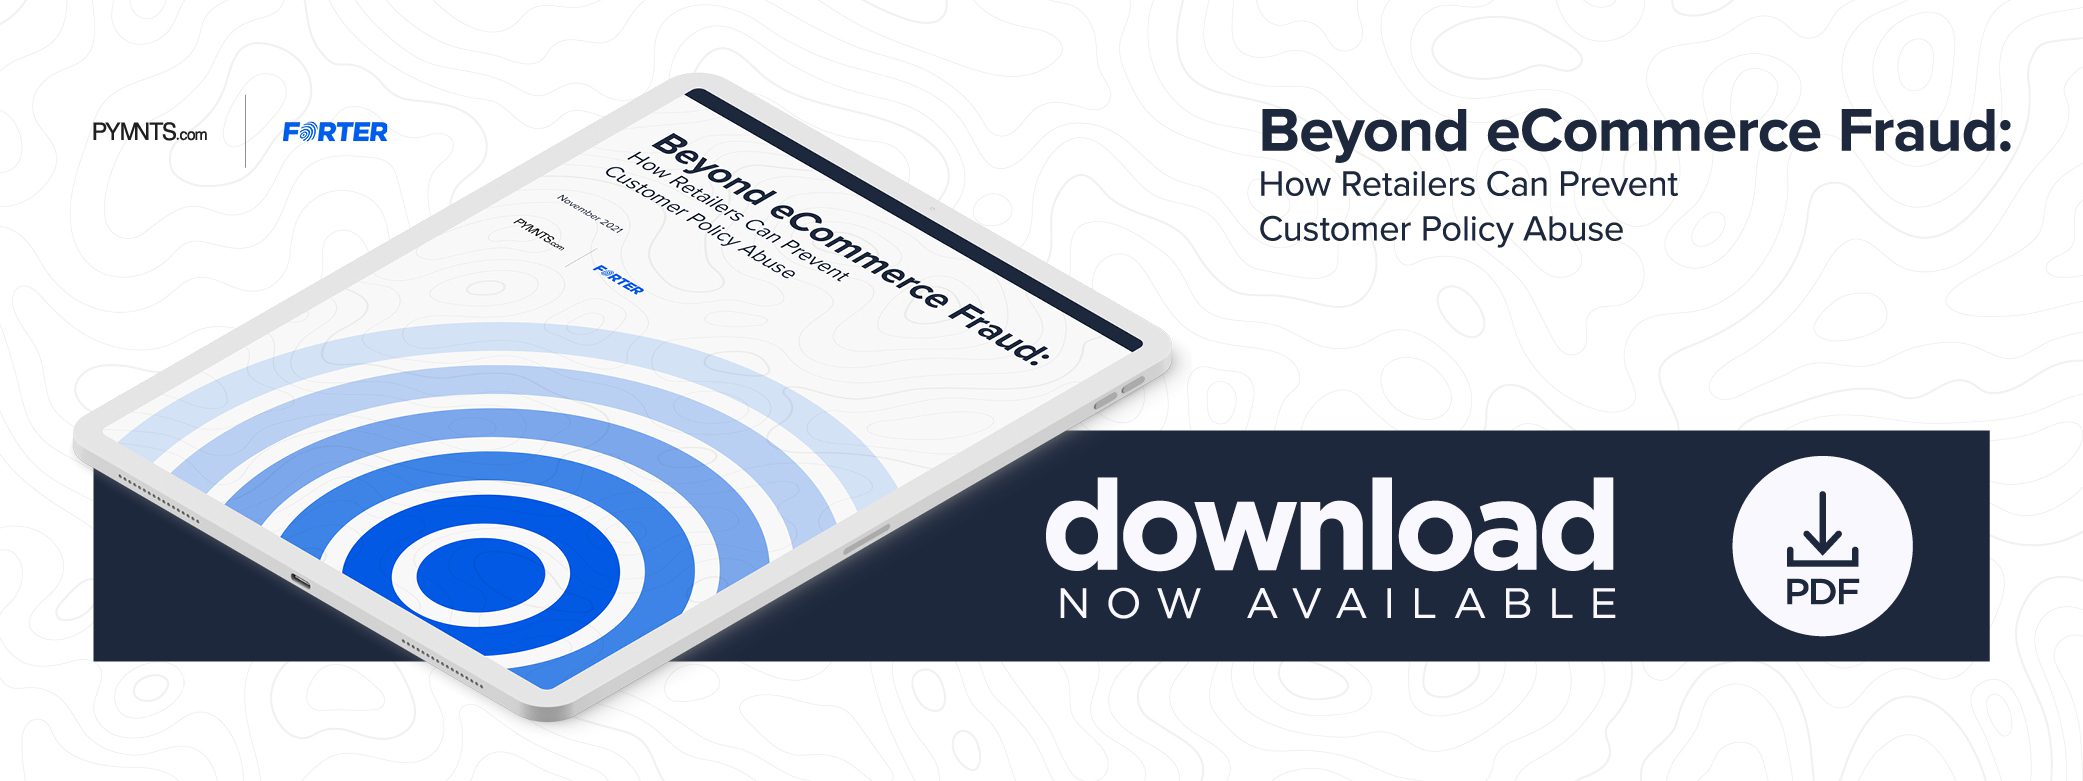 Download Beyond eCommerce Fraud: How Retailers Can Prevent Customer Policy Abuse